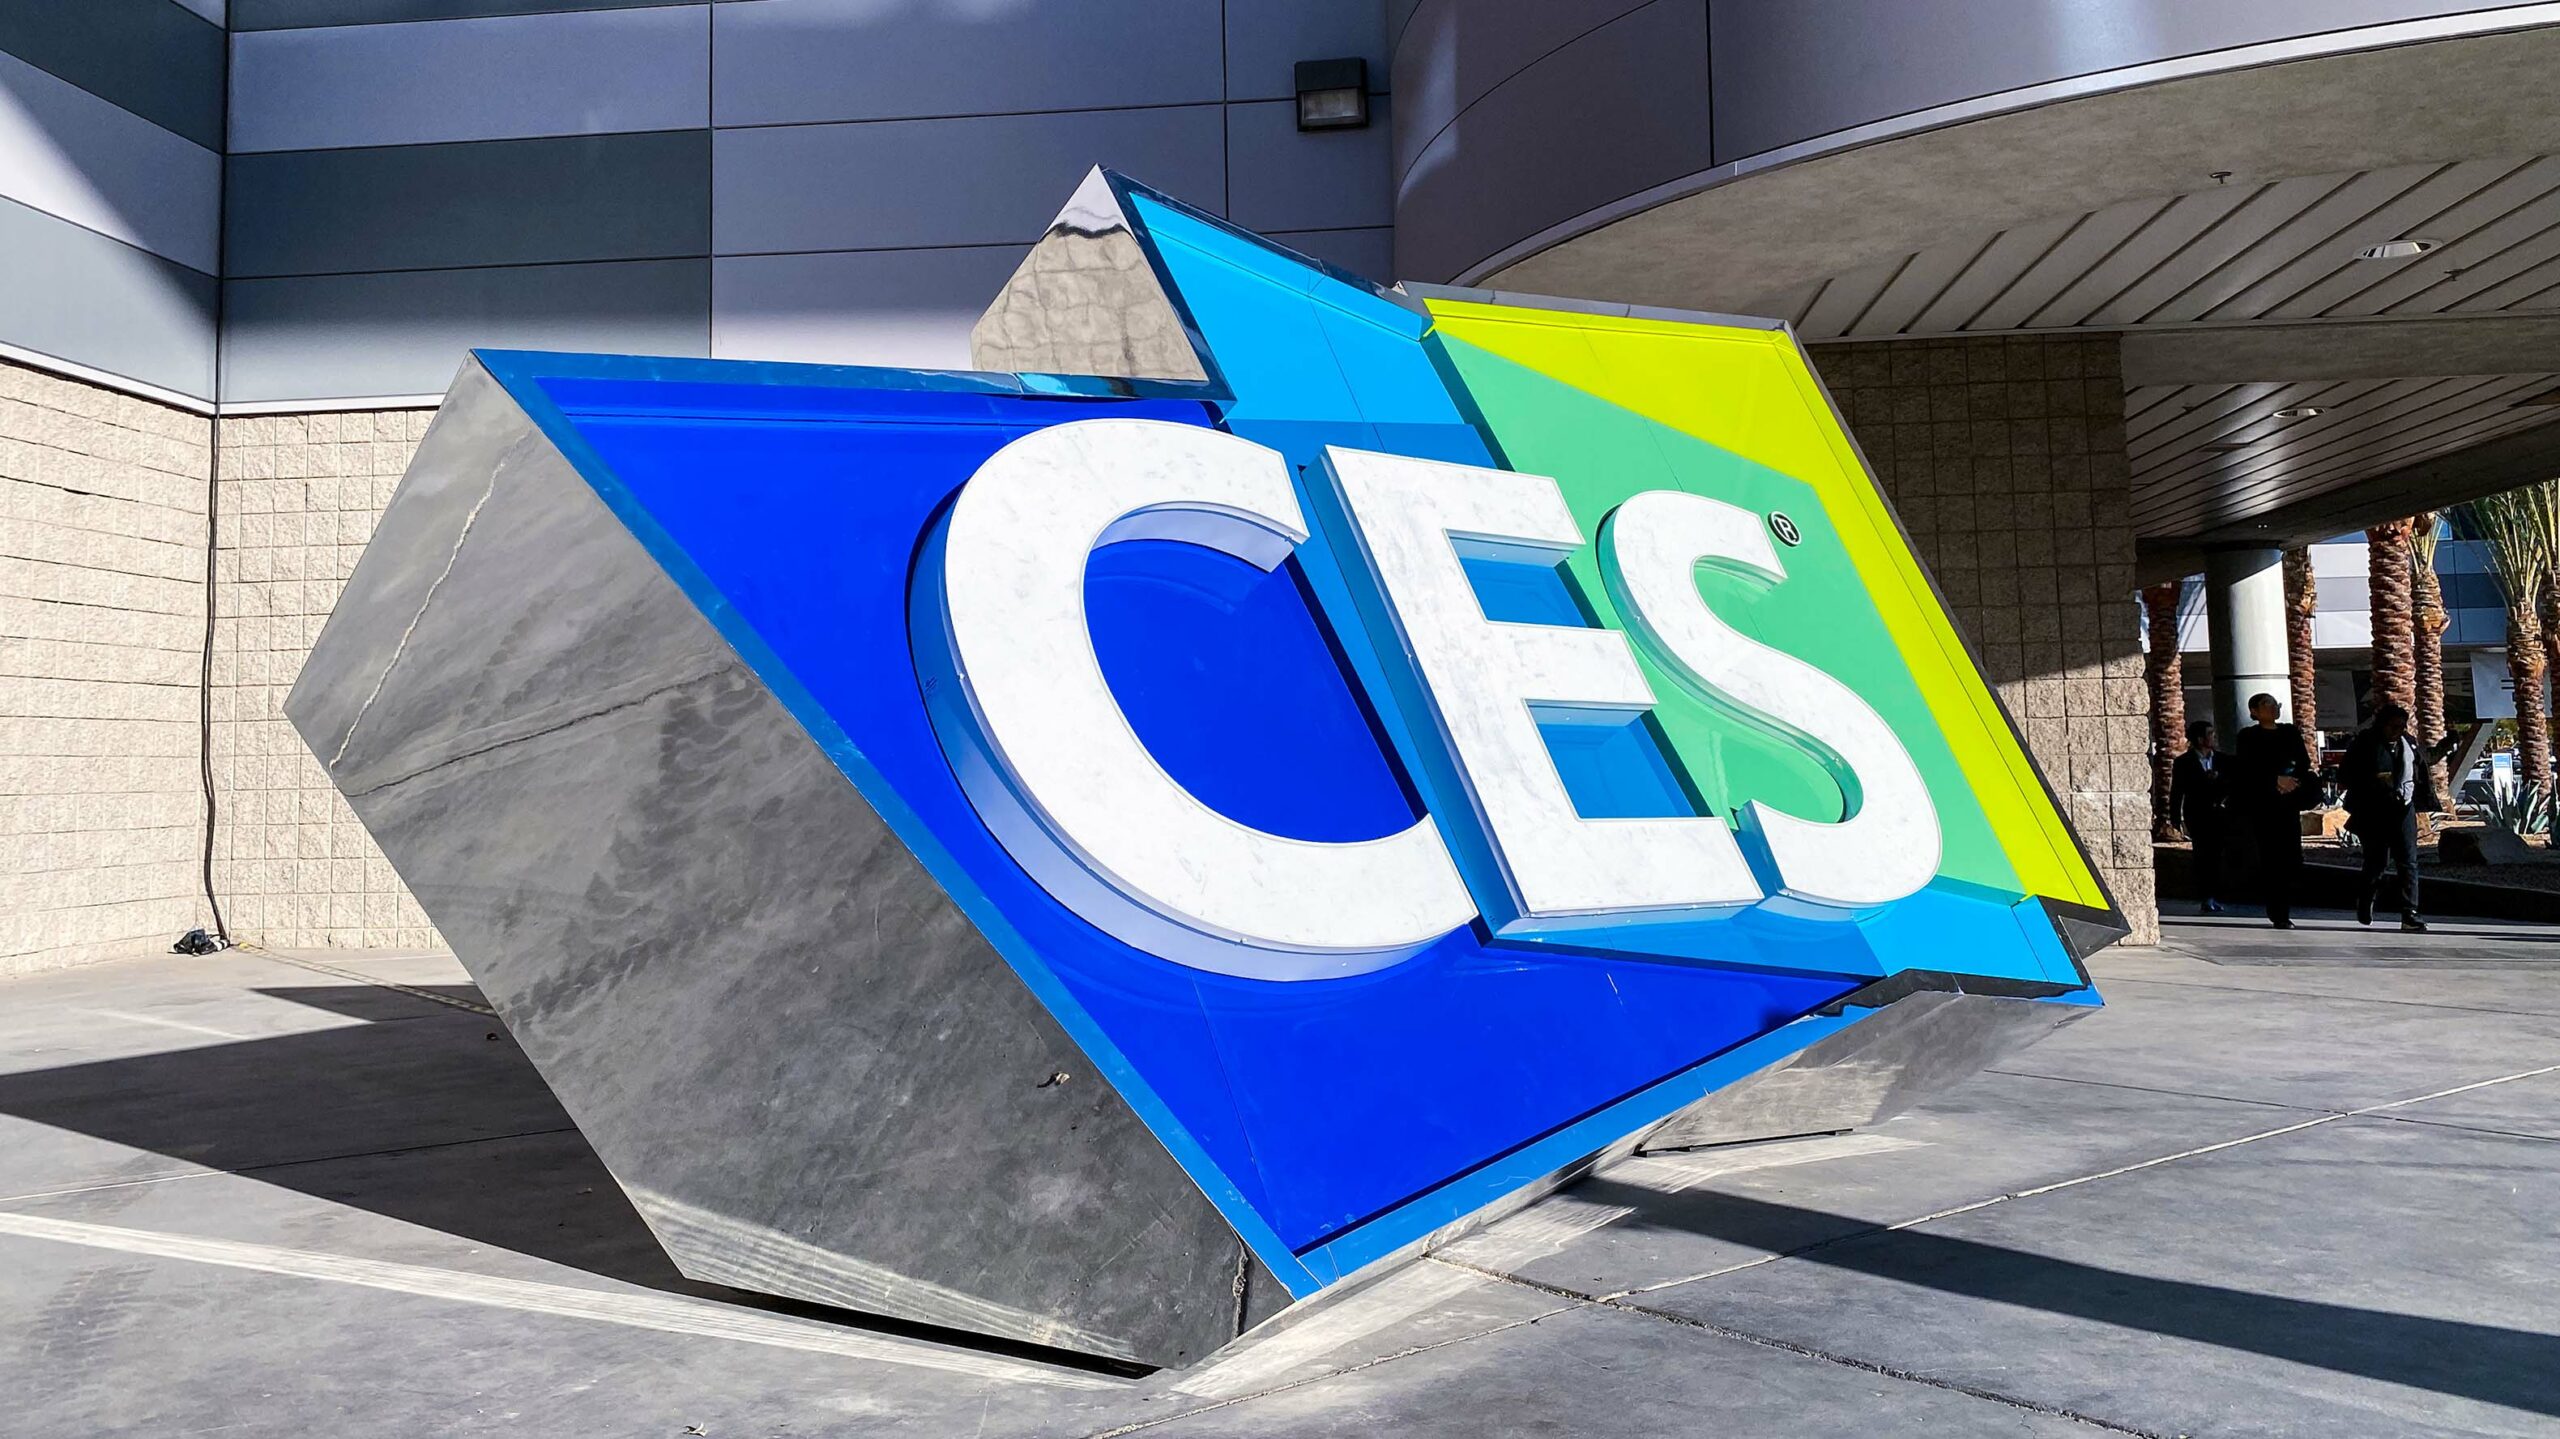 Big tech companies, sponsors pull out of CES 2022 amid Omicron